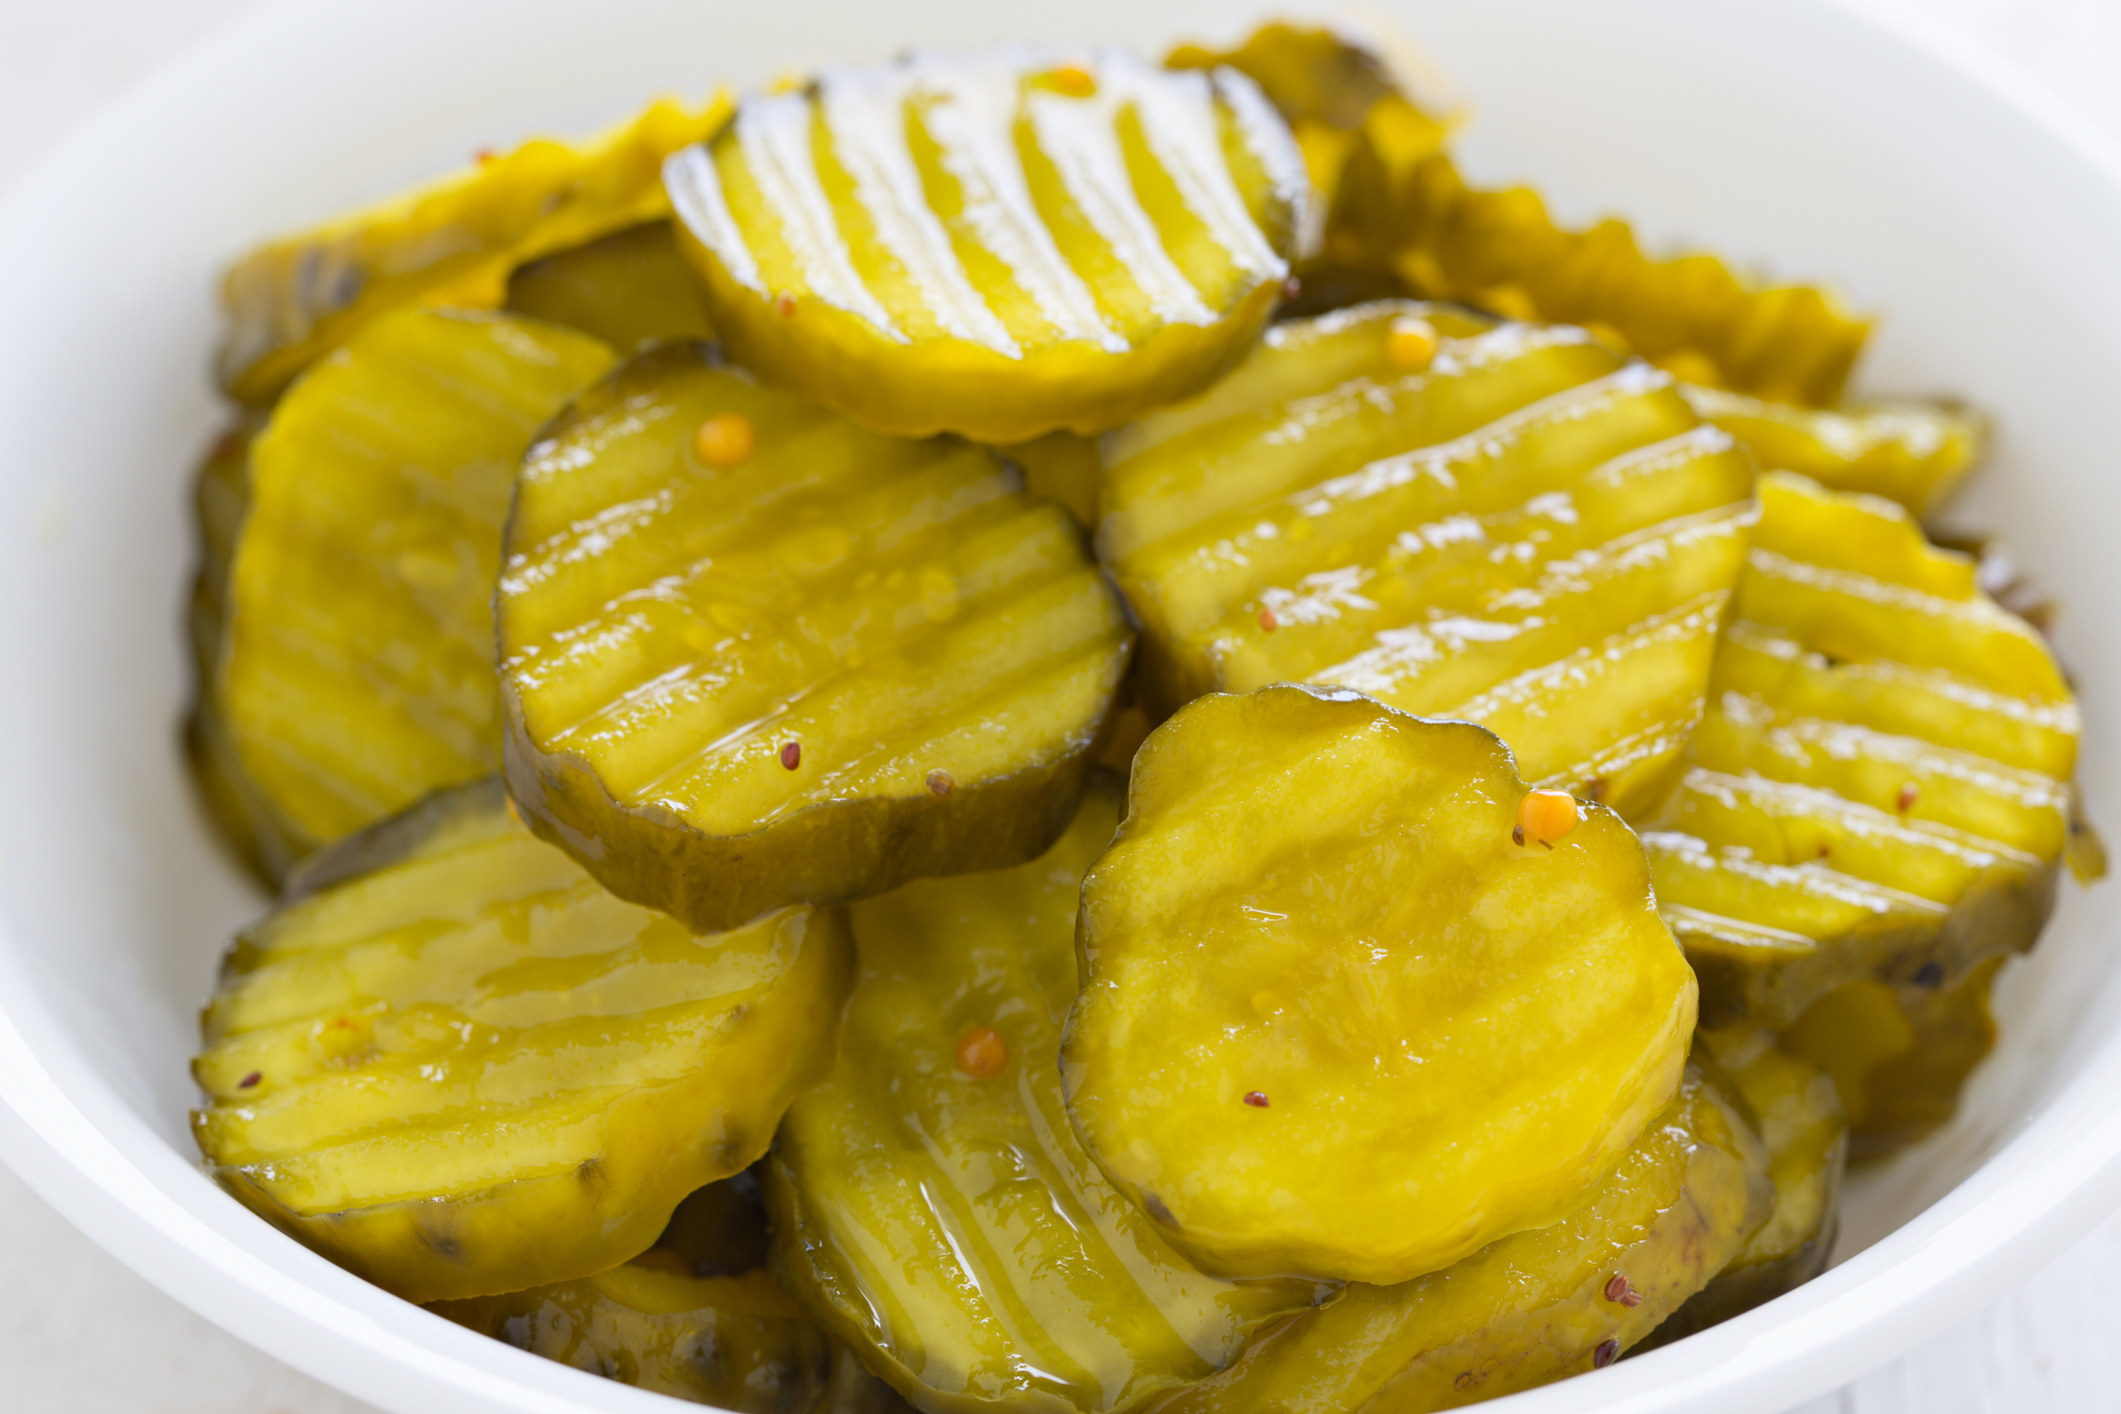 Bread-and-butter pickle chips